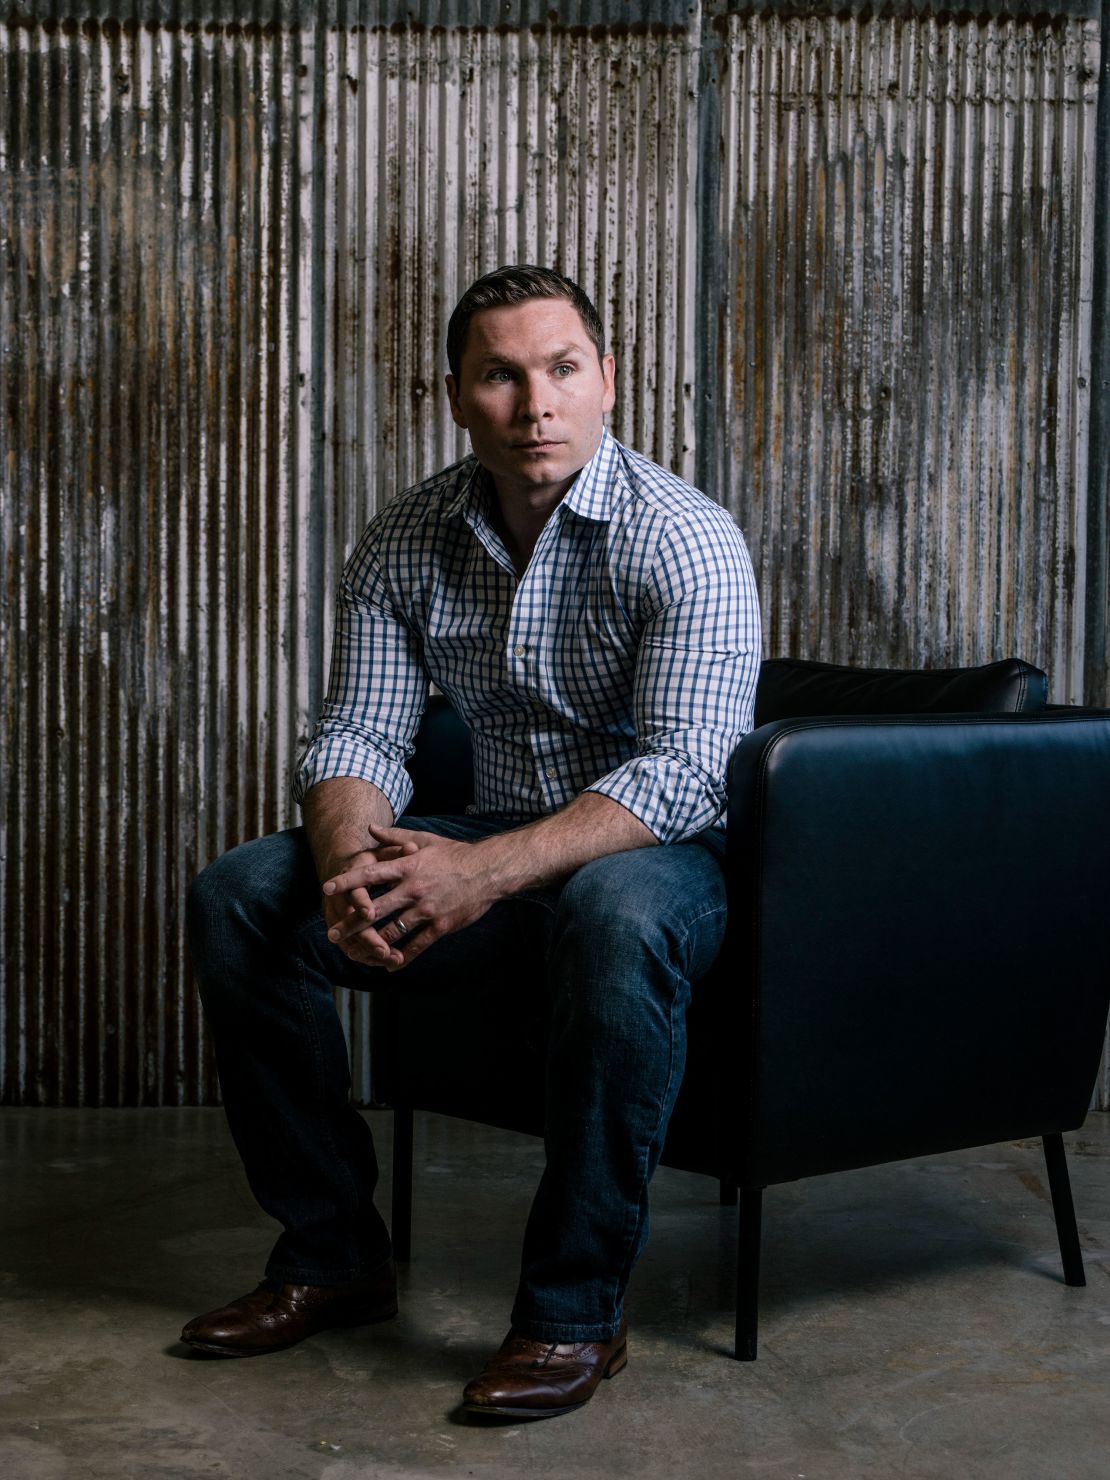 ID.me CEO Blake Hall, an army veteran, cofounded the company in 2010.